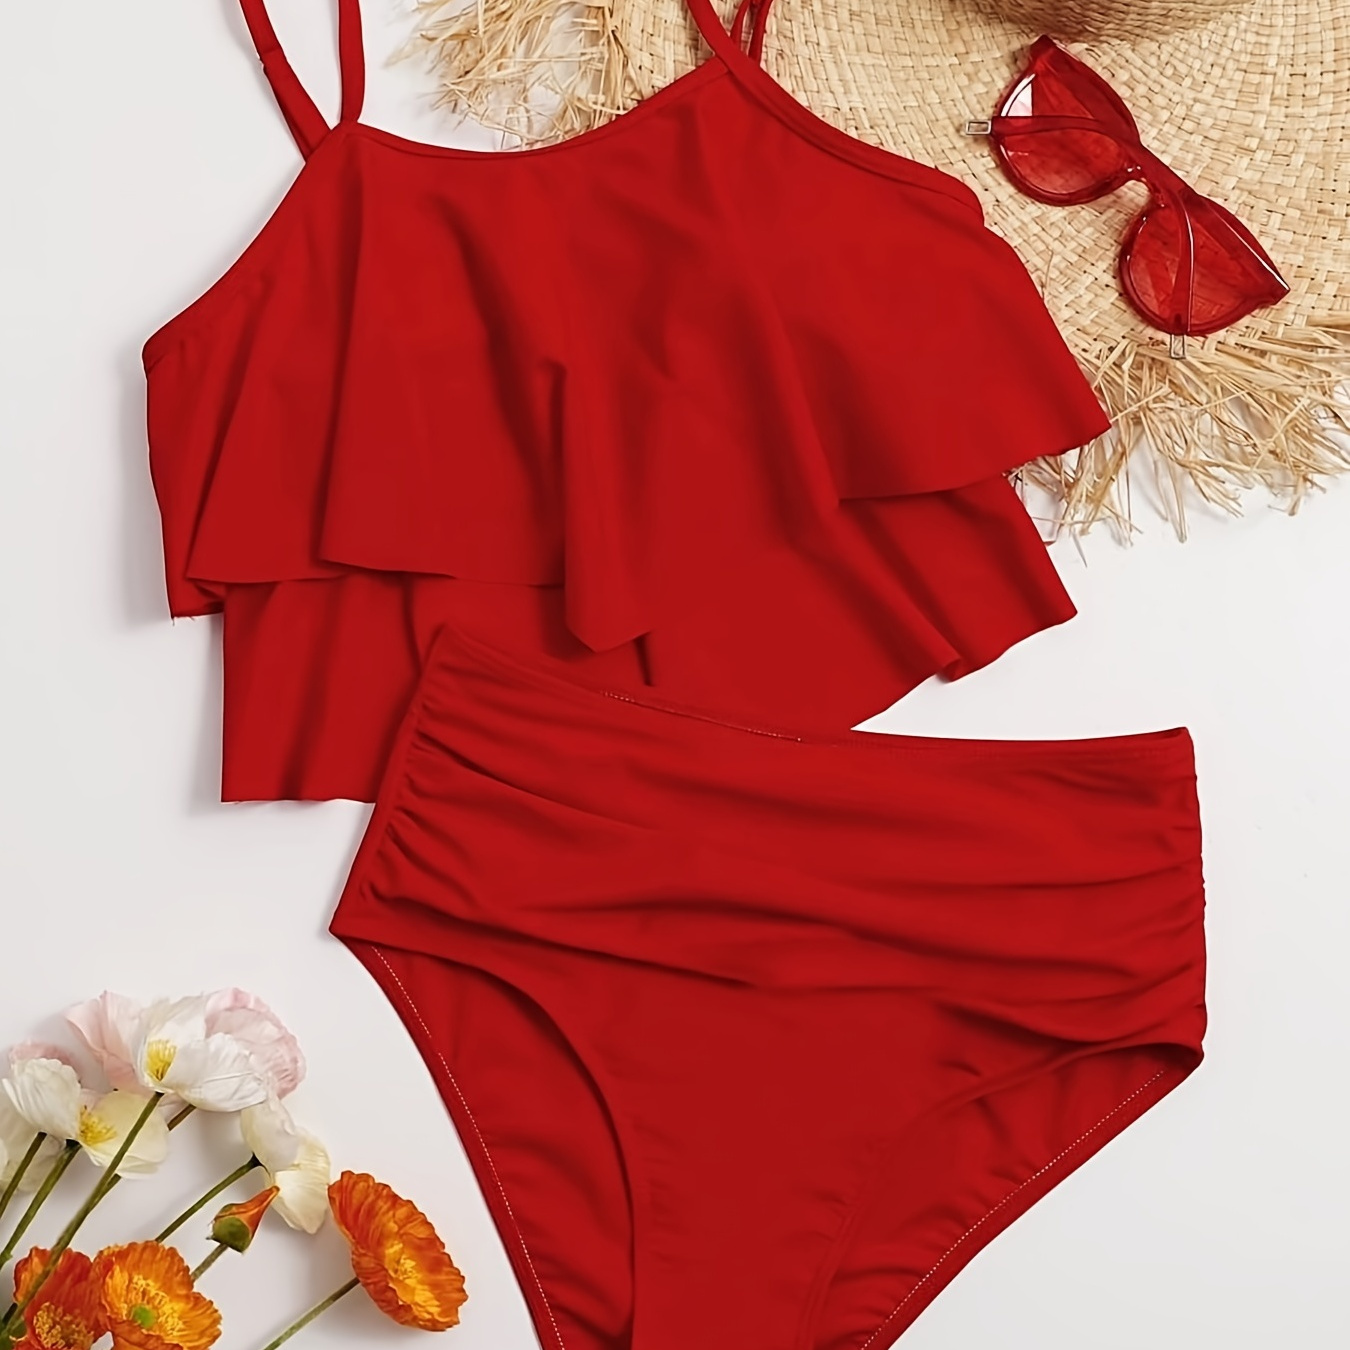 

Layer Ruffle Solid Red High Waist 2 Piece Set Tankini, Ruched Tummy Control Spaghetti Strap Stretchy Swimsuit For Beach Pool Bathing, Women's Swimwear & Clothing